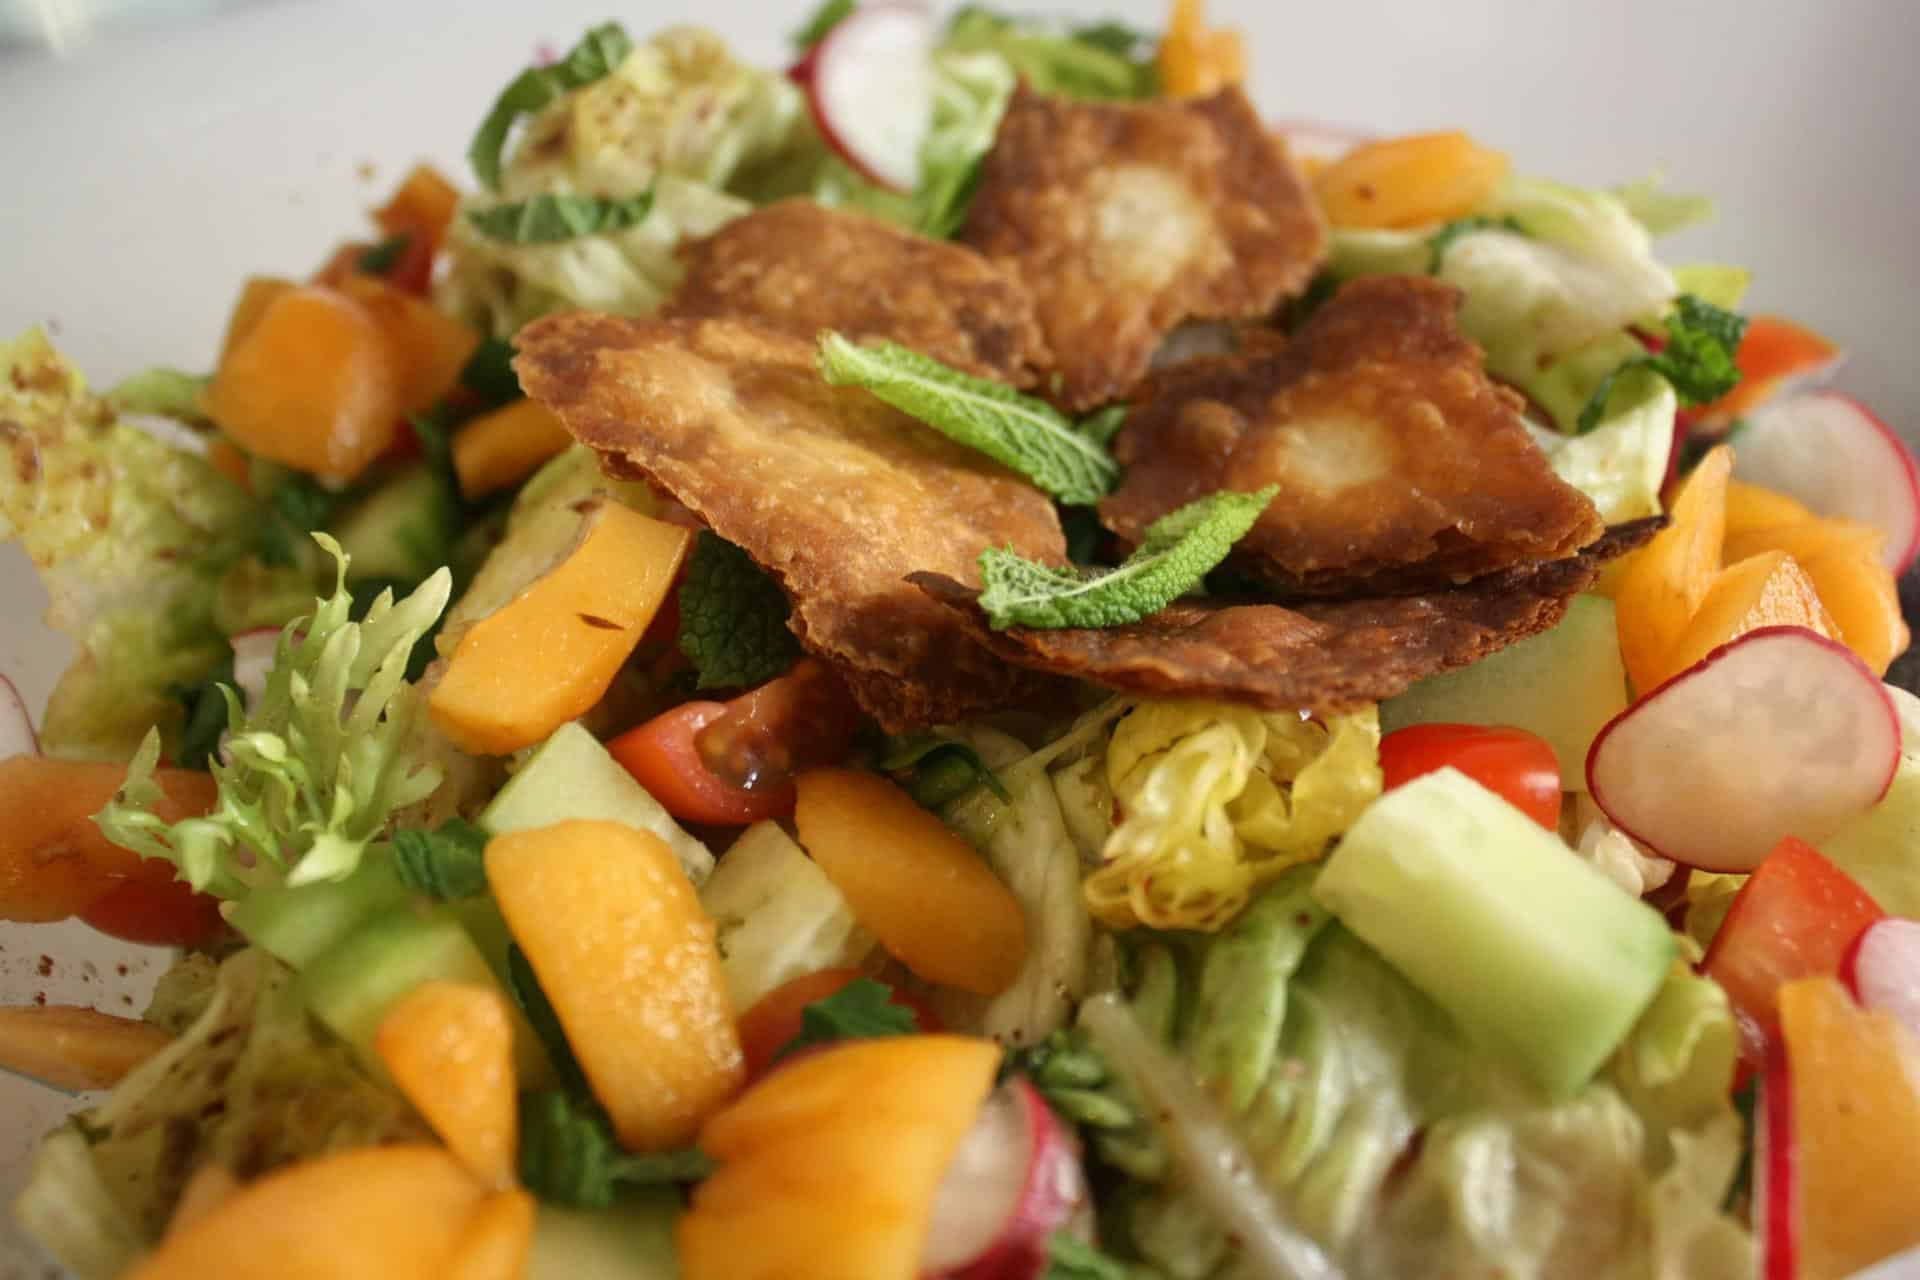 Fattoush Salad with Tangy Citrus Dressing and Loquats